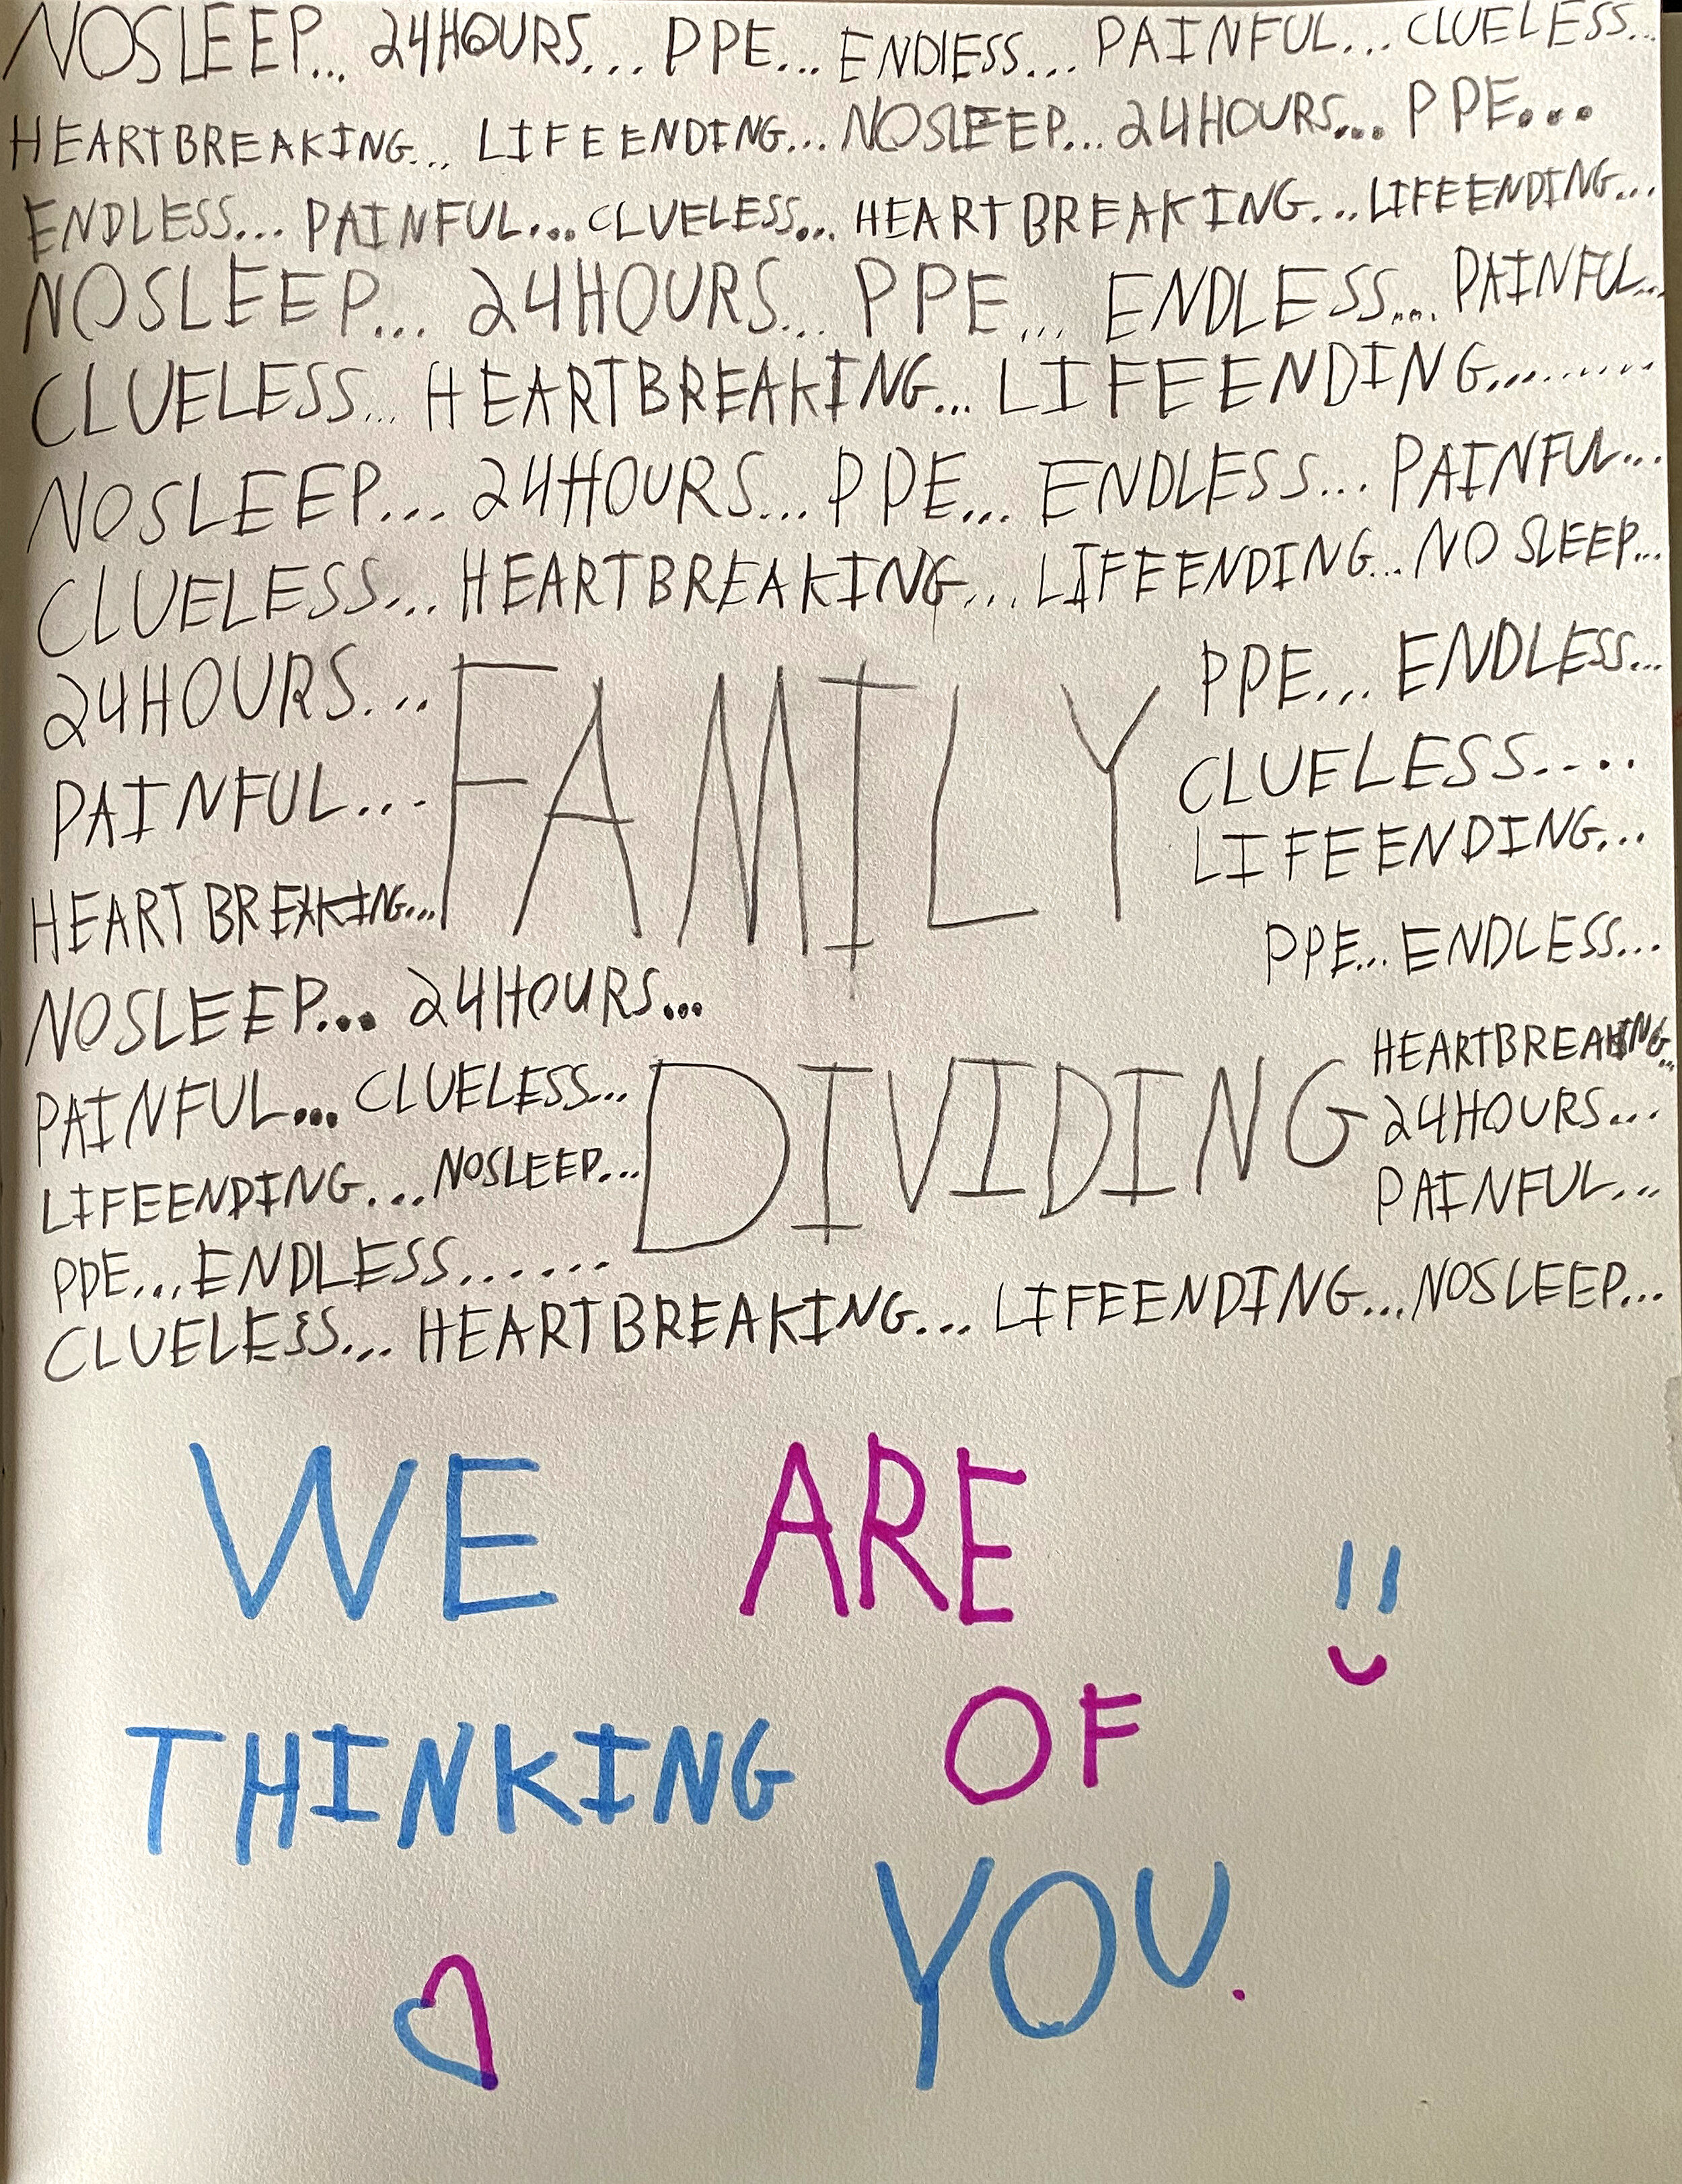 Keeping-You-In-Our-Thoughts-by-Bobby-age15.jpg